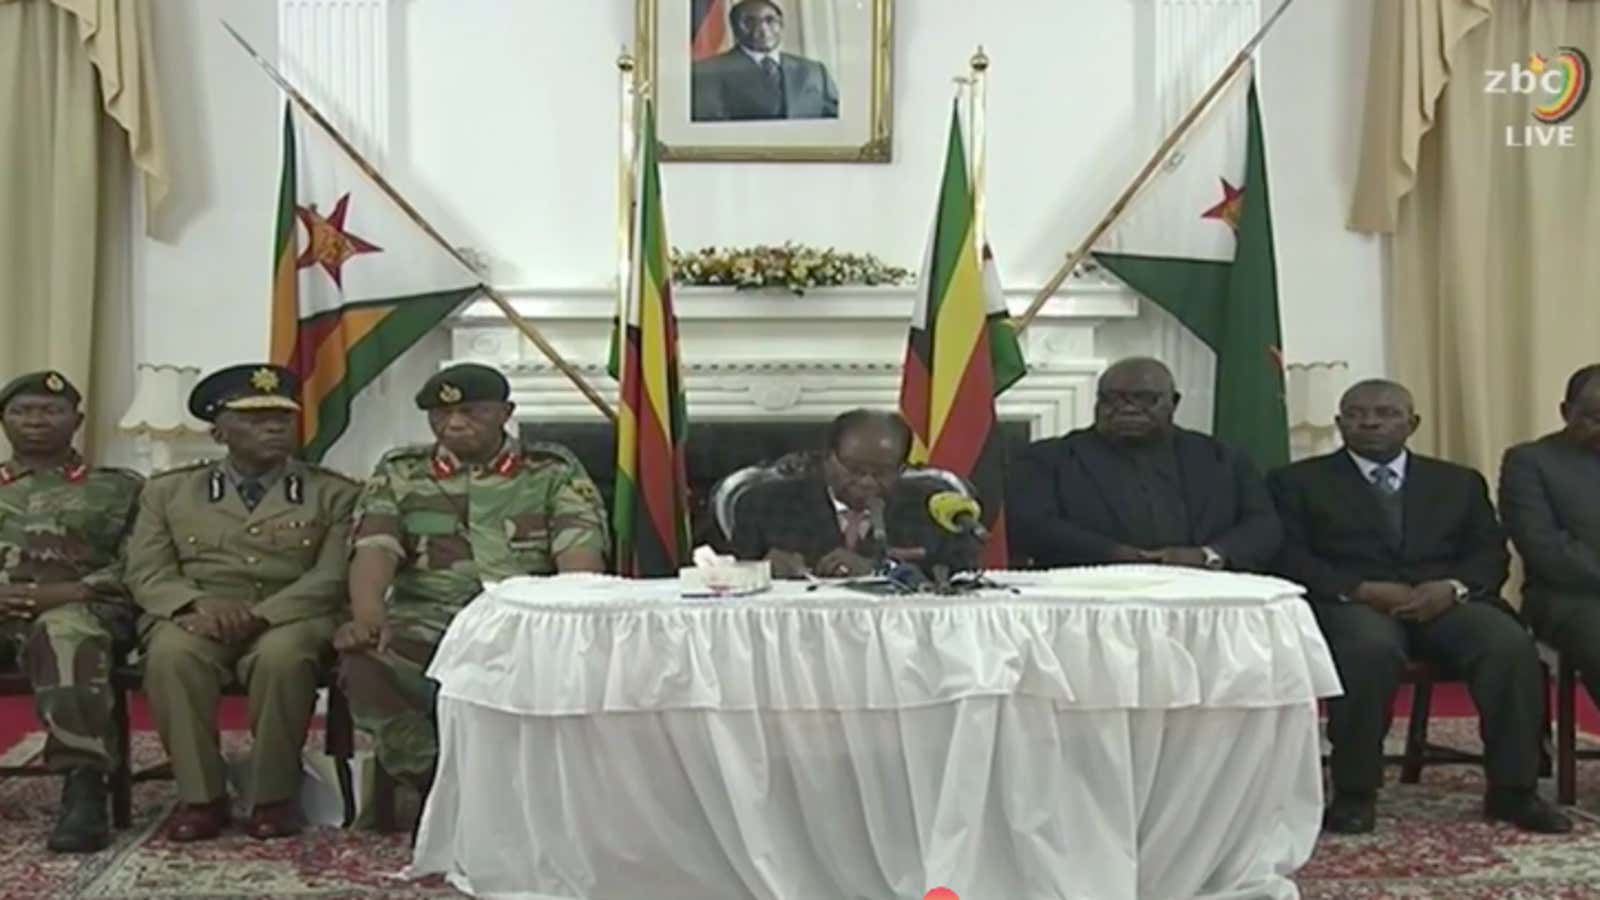 Robert Mugabe gives a statement in Harare, surrounded by senior military officials.